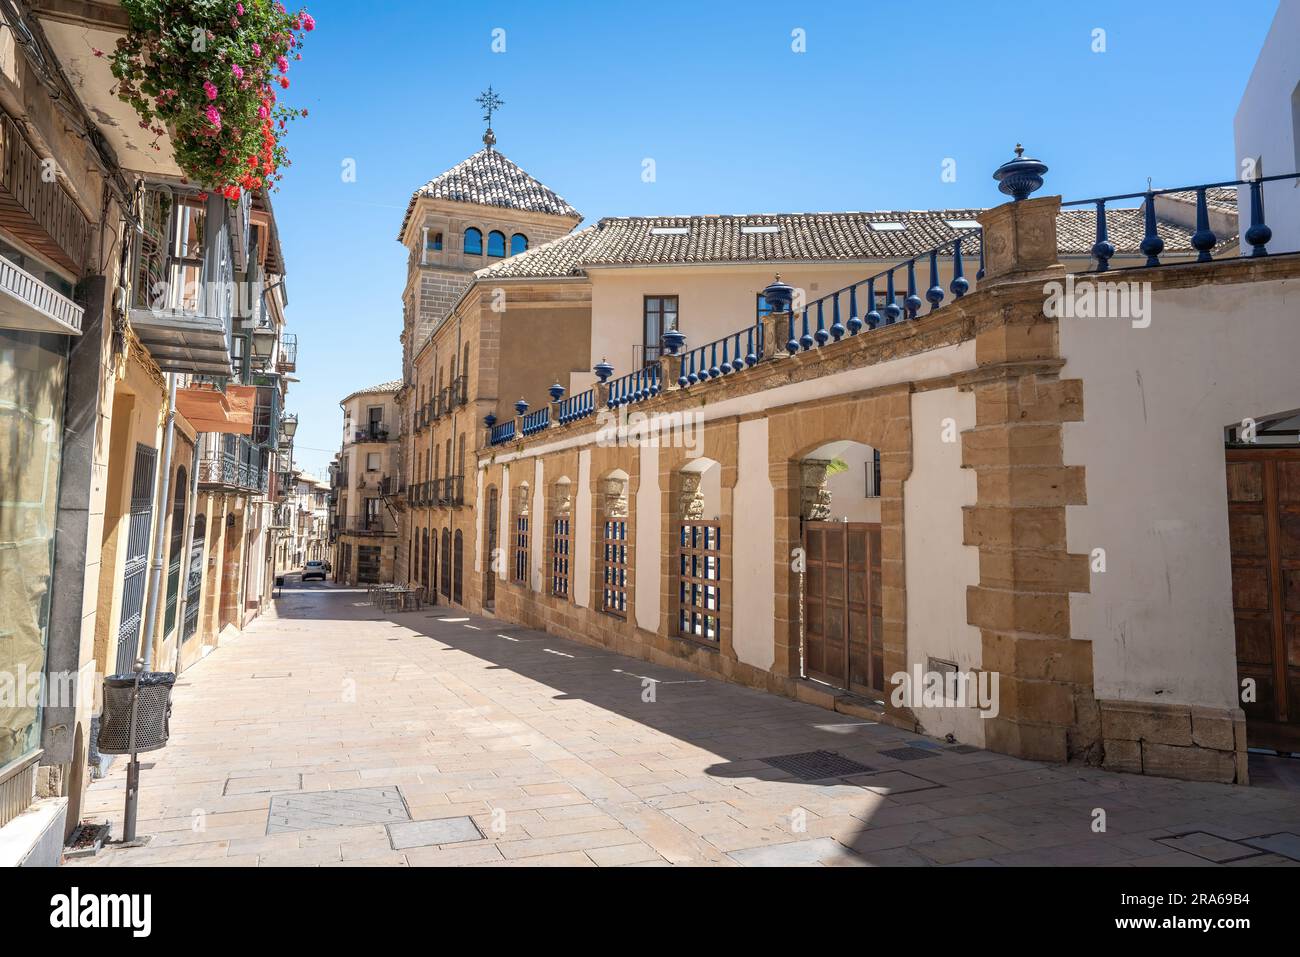 Calle Real Street and Palace of the Counts of Guadiana - Ubeda, Jaen, Spain Stock Photo